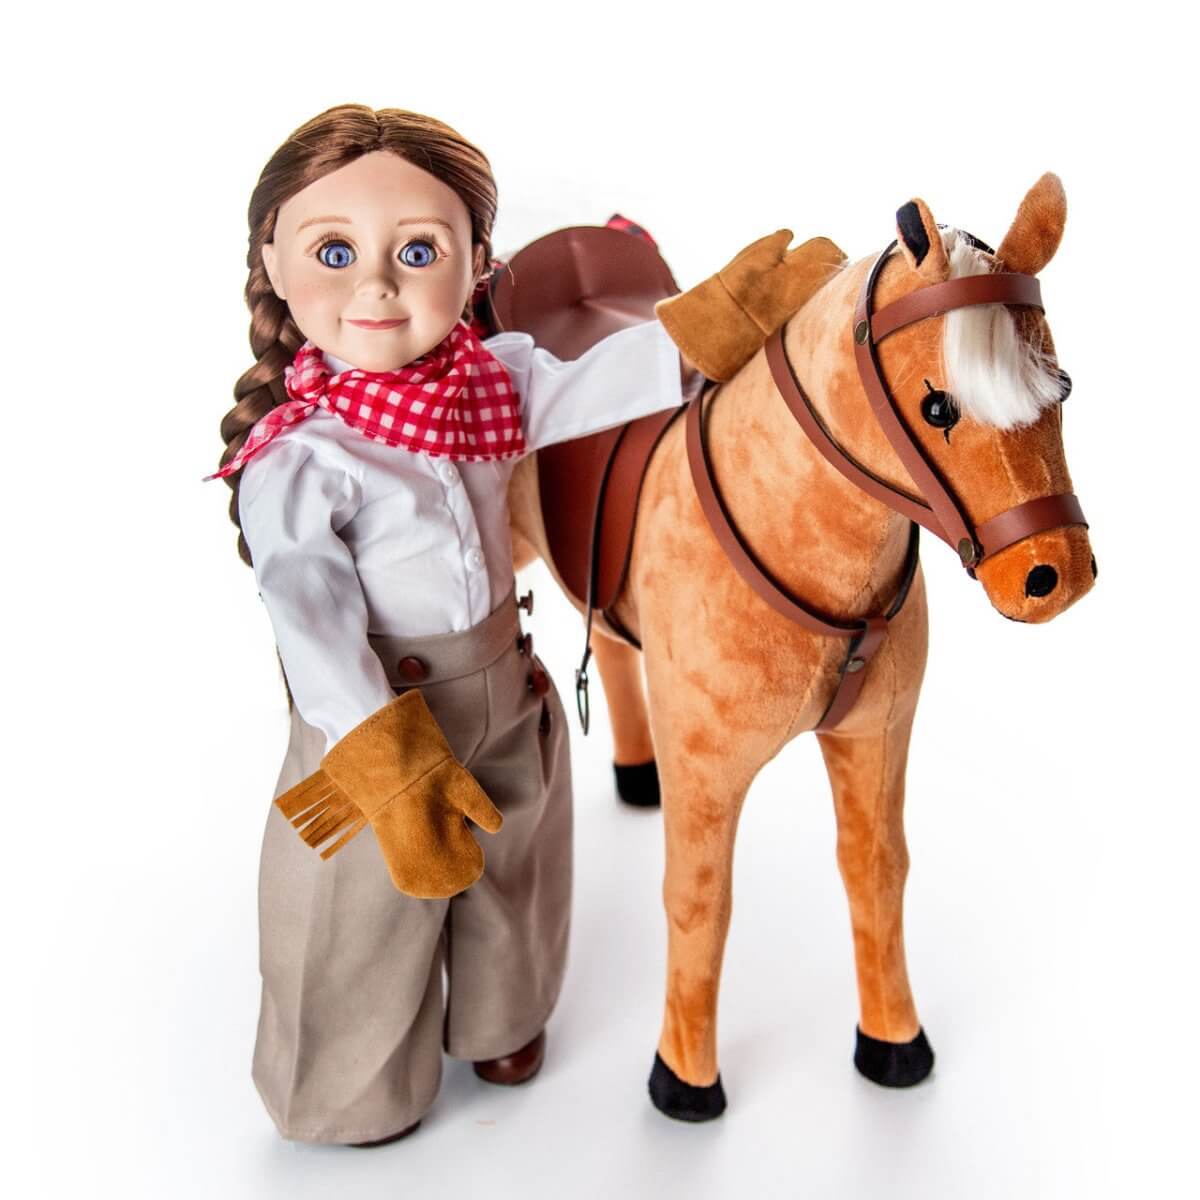 7 Piece Frontier Girl Outfit with Boots, Clothes & Accessories for 18 Inch Dolls - Simon's Collectibles